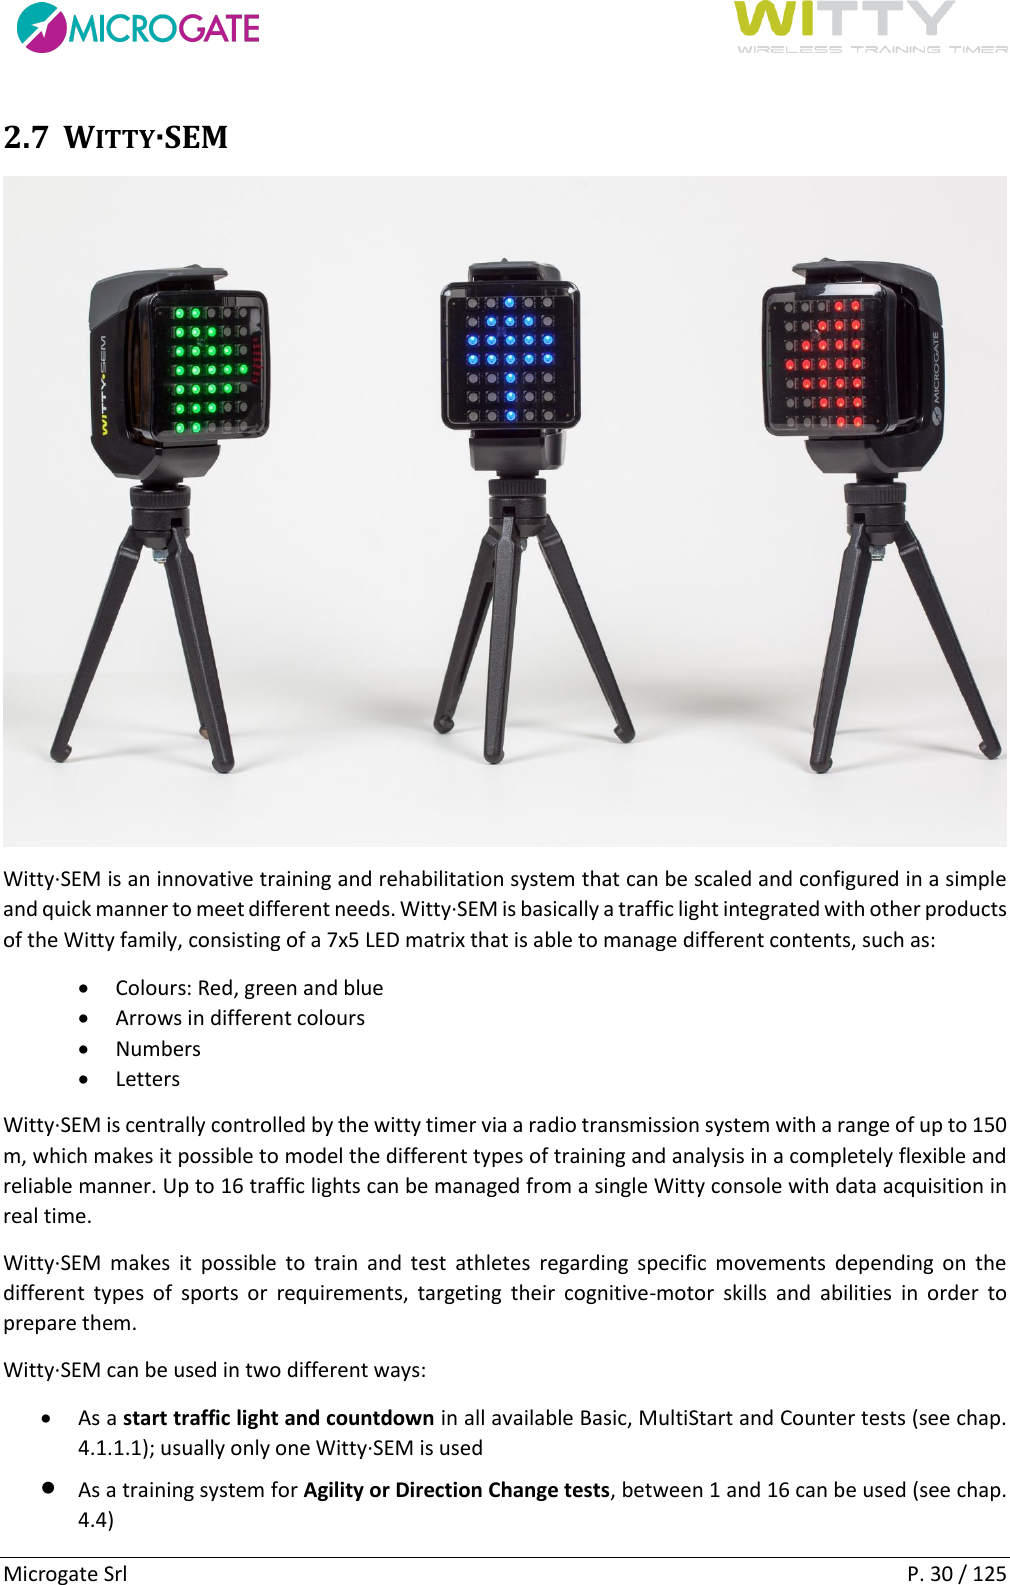      Microgate Srl    P. 30 / 125 2.7 WITTY·SEM  Witty·SEM is an innovative training and rehabilitation system that can be scaled and configured in a simple and quick manner to meet different needs. Witty·SEM is basically a traffic light integrated with other products of the Witty family, consisting of a 7x5 LED matrix that is able to manage different contents, such as:  Colours: Red, green and blue  Arrows in different colours  Numbers   Letters  Witty·SEM is centrally controlled by the witty timer via a radio transmission system with a range of up to 150 m, which makes it possible to model the different types of training and analysis in a completely flexible and reliable manner. Up to 16 traffic lights can be managed from a single Witty console with data acquisition in real time. Witty·SEM  makes  it  possible  to  train  and  test  athletes  regarding  specific movements  depending  on  the different  types  of  sports  or  requirements,  targeting  their  cognitive-motor  skills  and  abilities  in  order  to prepare them.  Witty·SEM can be used in two different ways:  As a start traffic light and countdown in all available Basic, MultiStart and Counter tests (see chap. 4.1.1.1); usually only one Witty·SEM is used  As a training system for Agility or Direction Change tests, between 1 and 16 can be used (see chap. 4.4) 